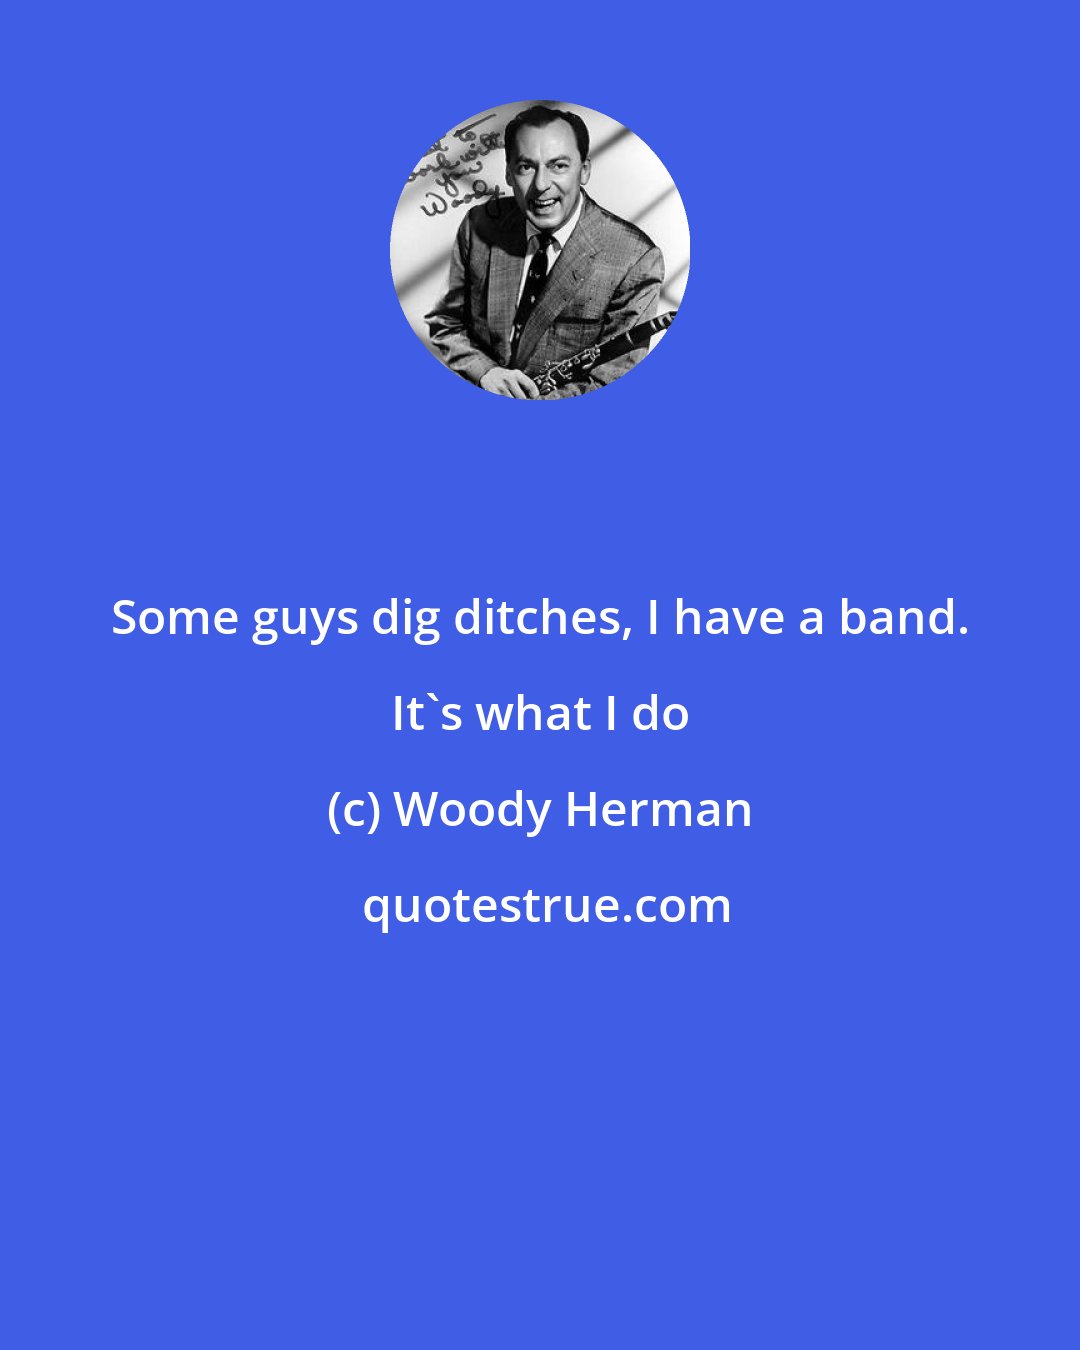 Woody Herman: Some guys dig ditches, I have a band. It's what I do